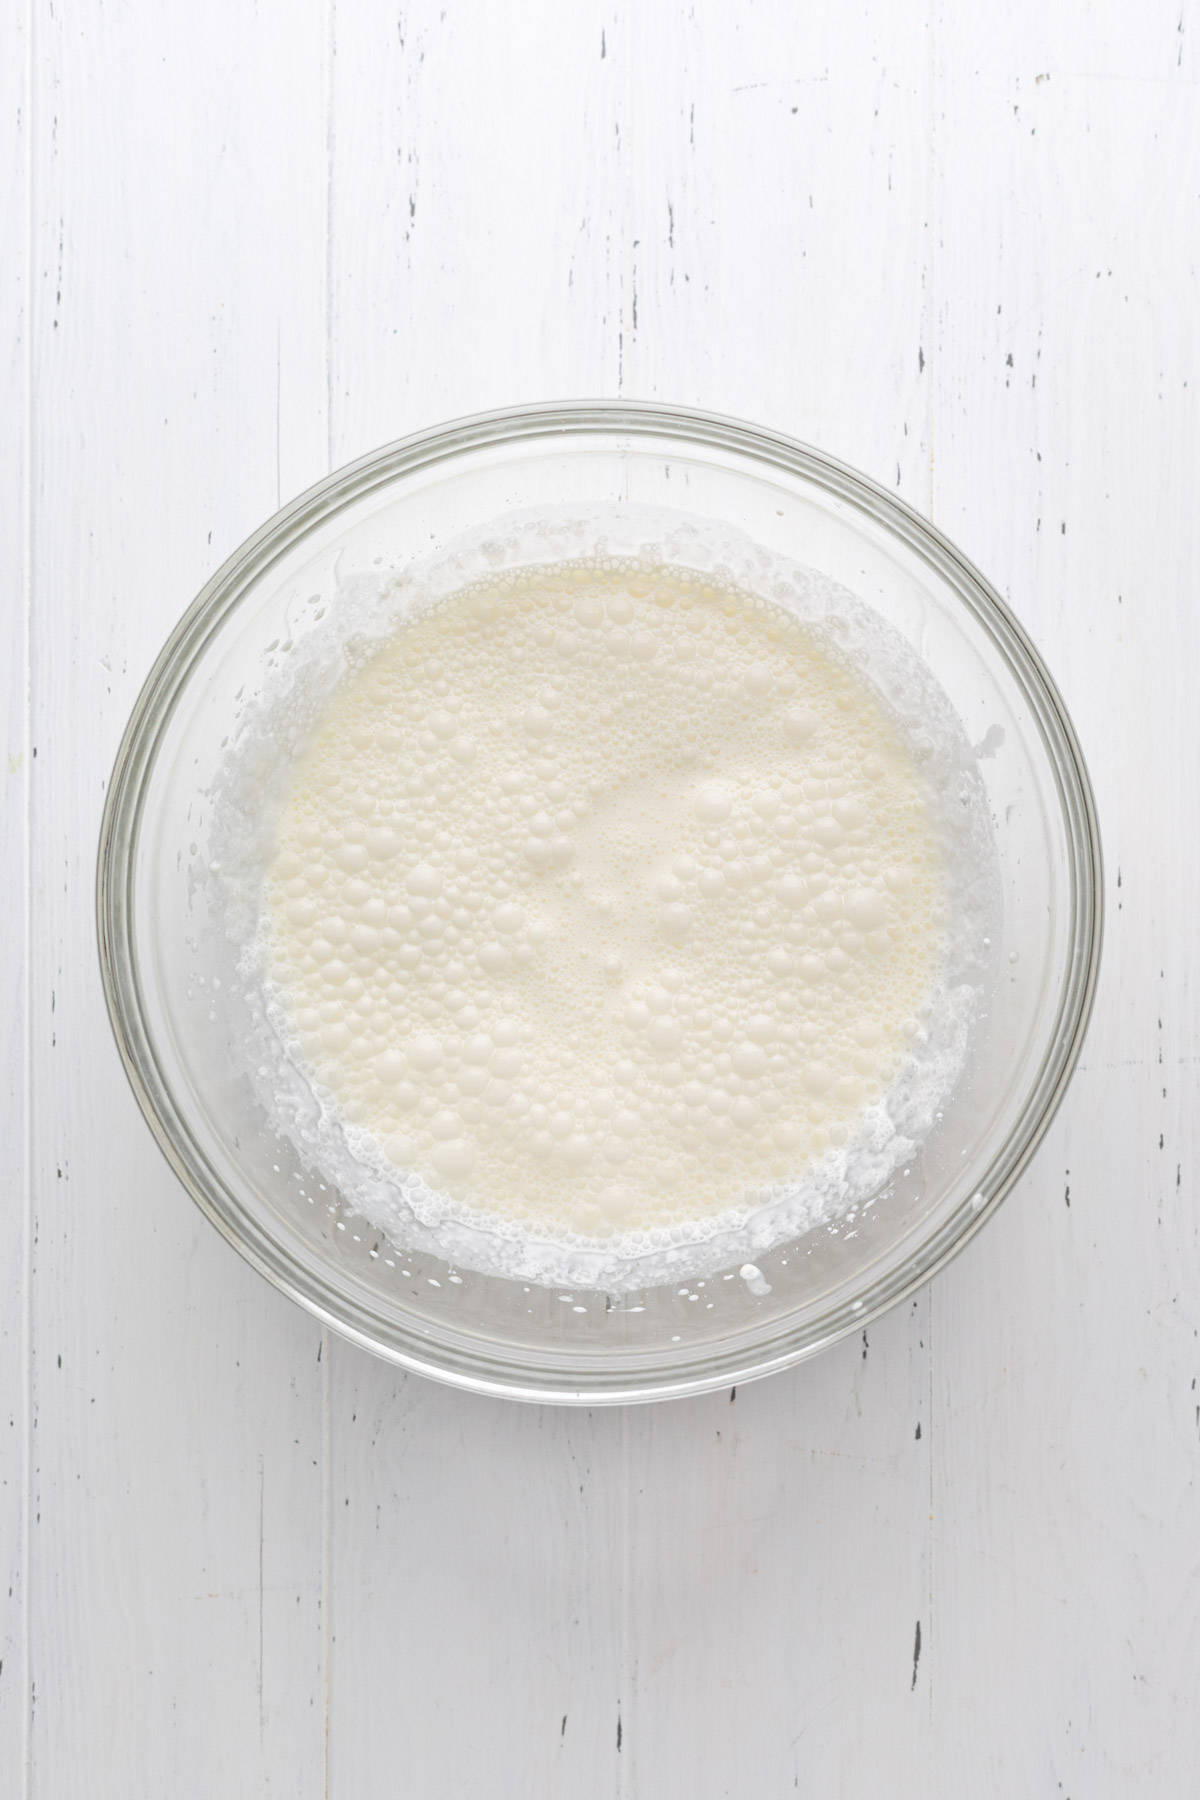 Heavy cream, powdered sugar, and vanilla combined until frothy in a glass mixing bowl.